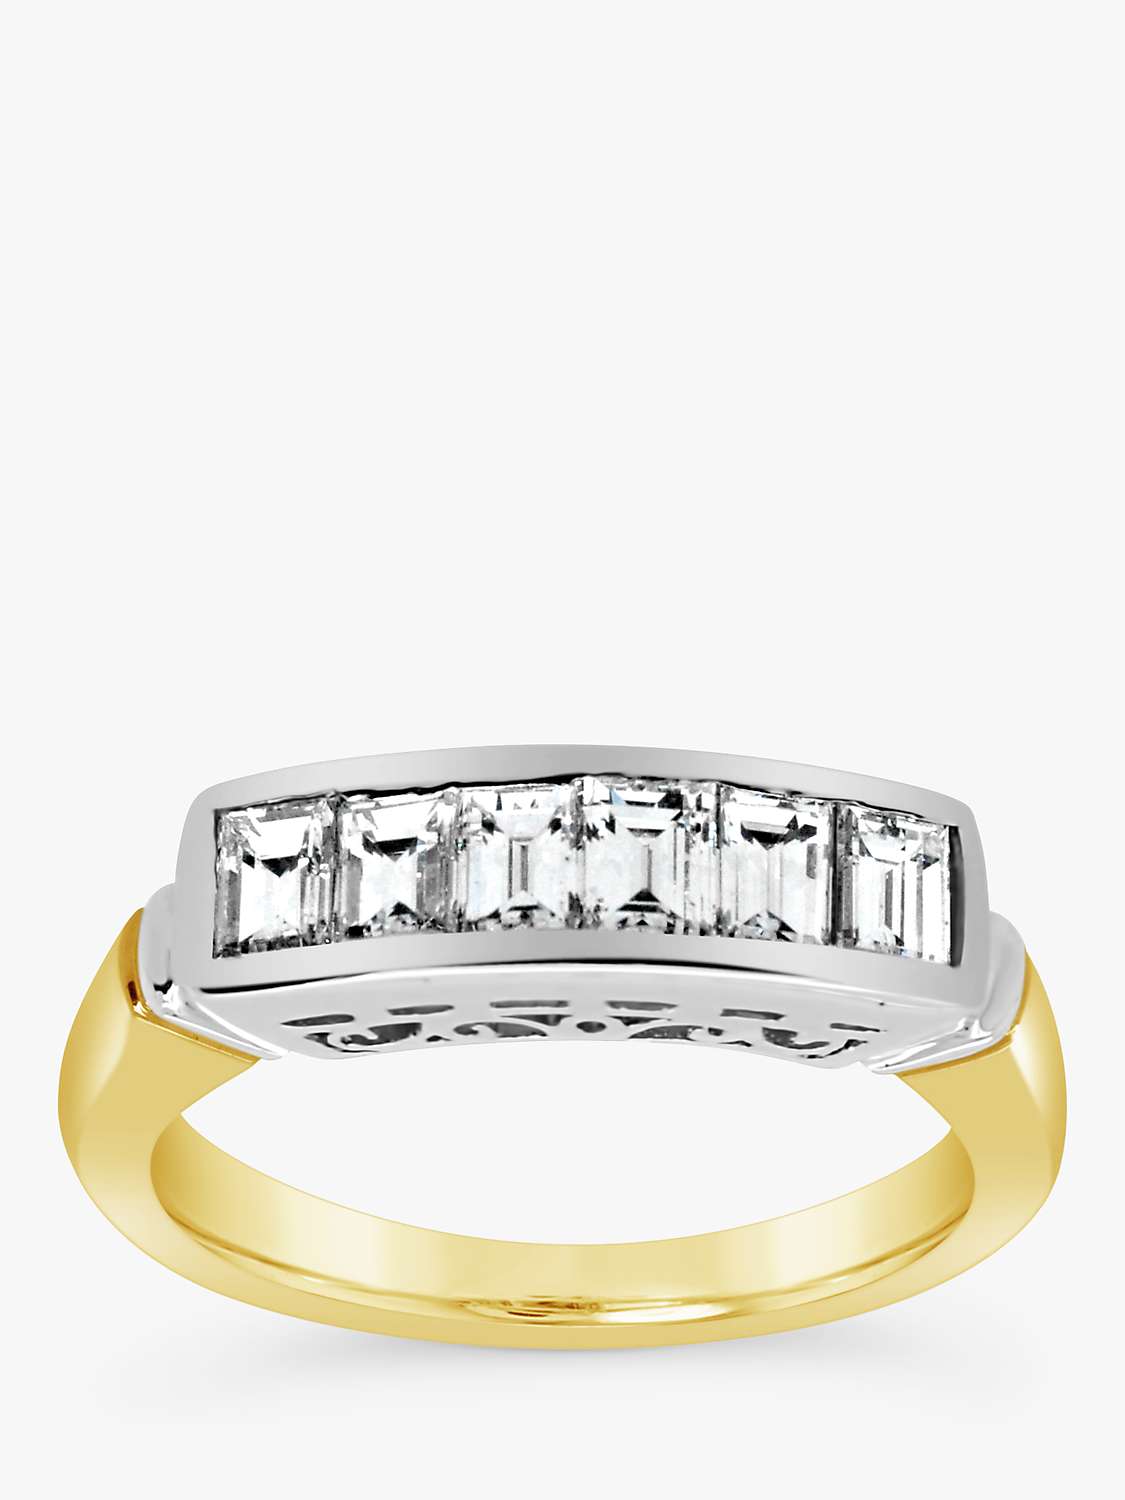 Buy Milton & Humble Jewellery Second Hand 14ct Yellow and White Gold Diamond Half Eternity Ring Online at johnlewis.com